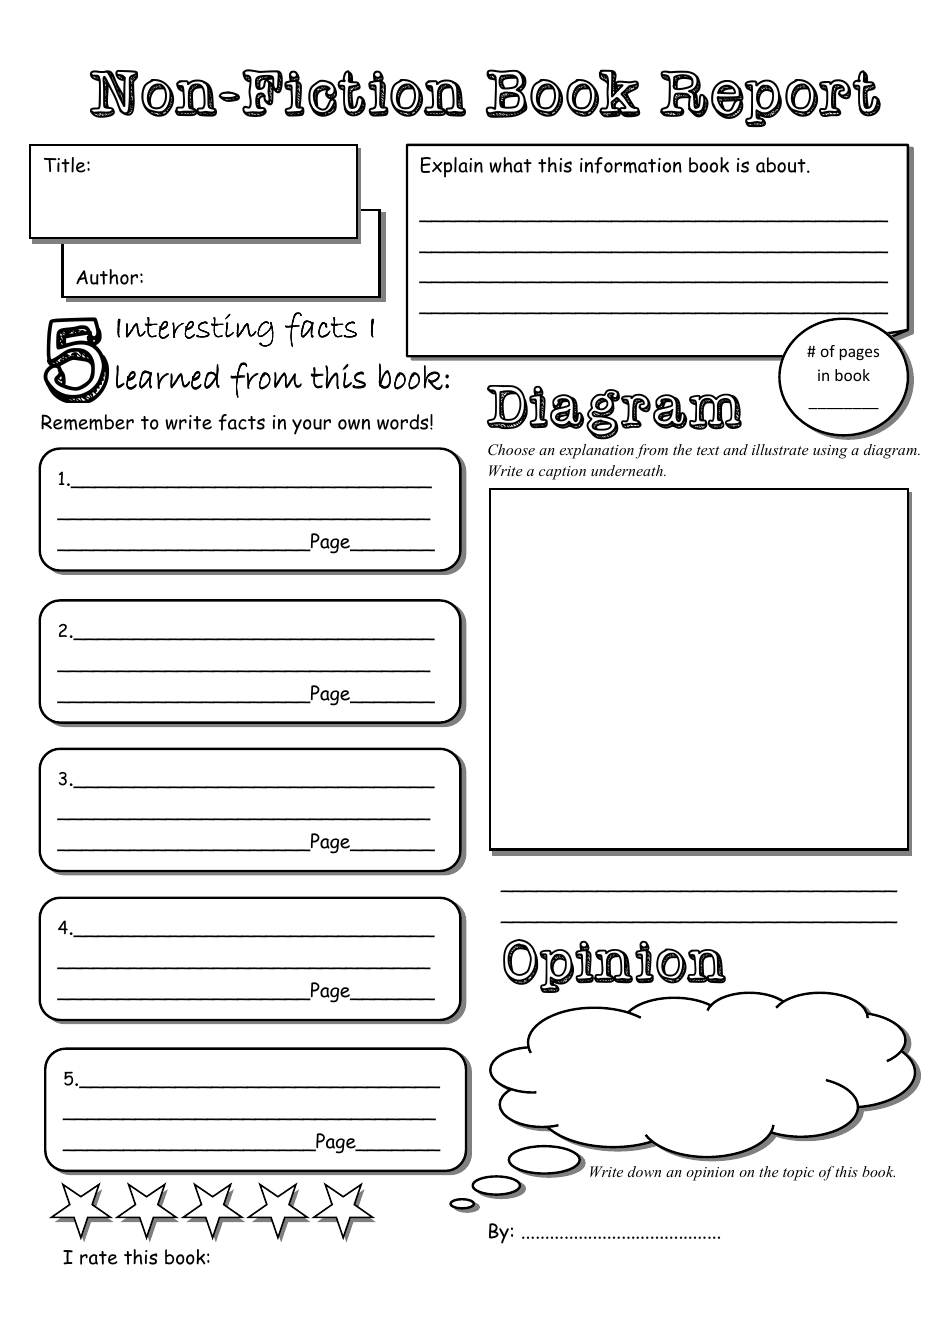 Non-fiction Book Report Template - Black and White, Page 1